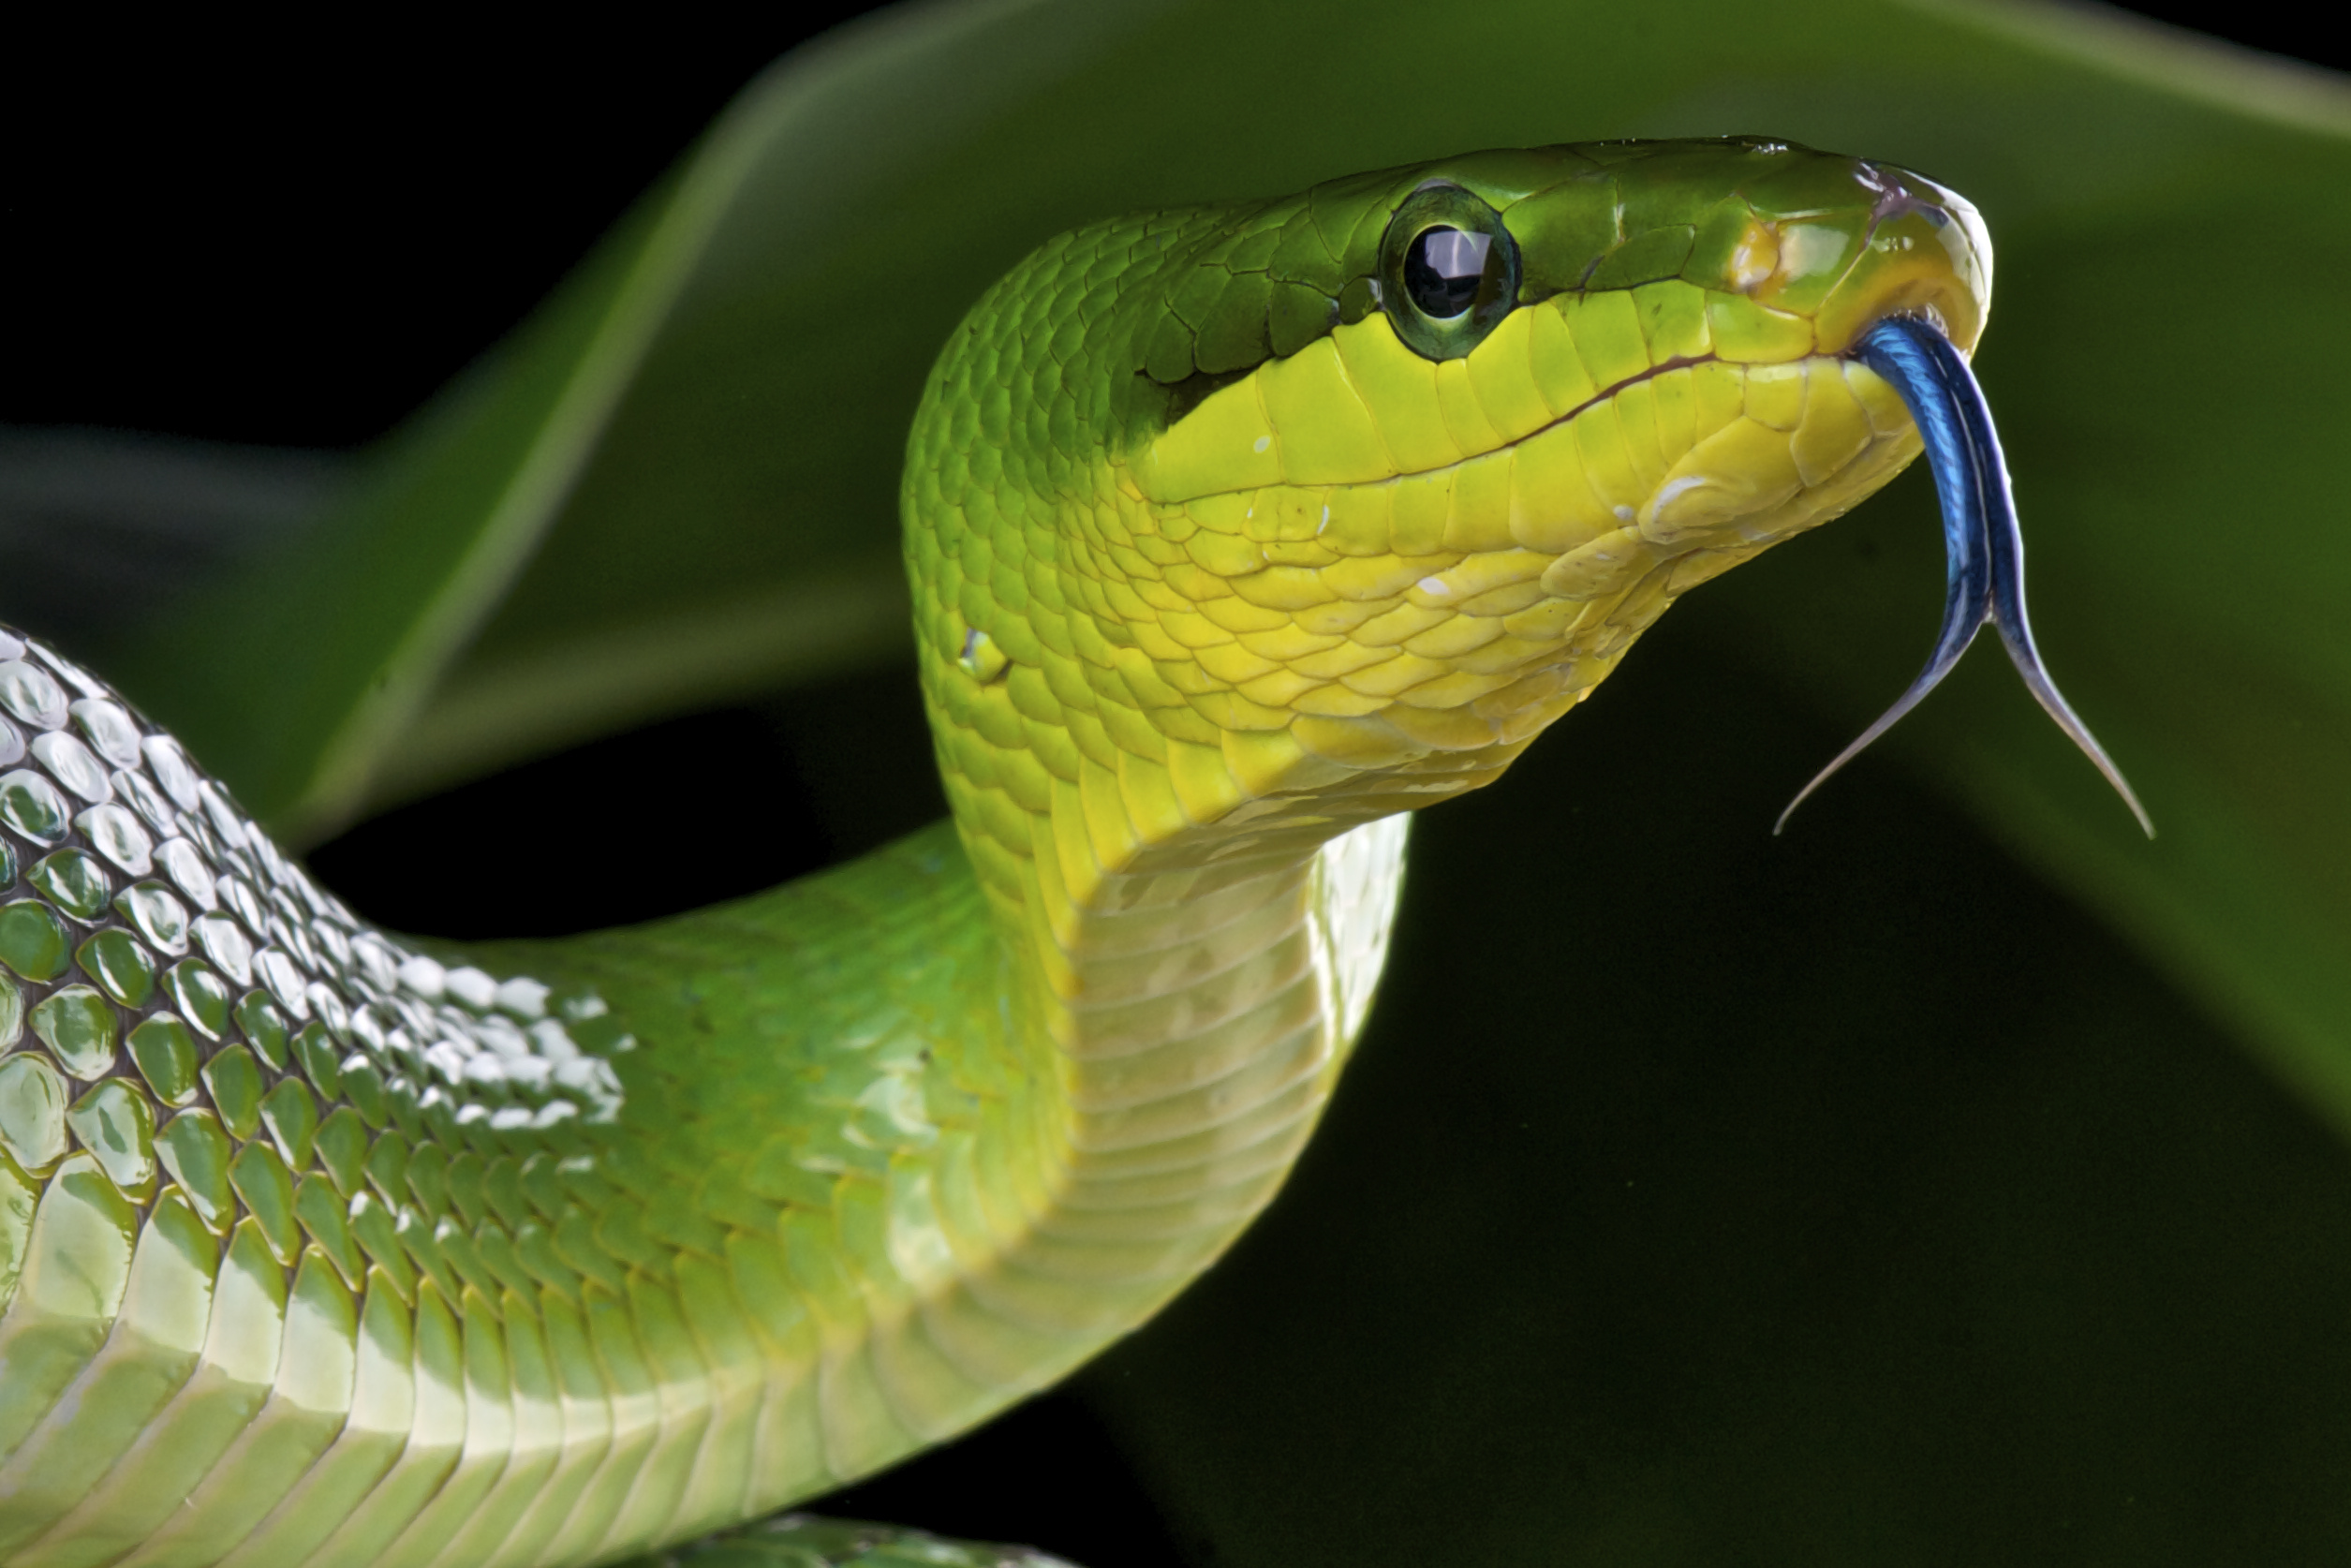 Snake Devours Smaller Snake Alive As Its Tongue Twitches in Weird Video